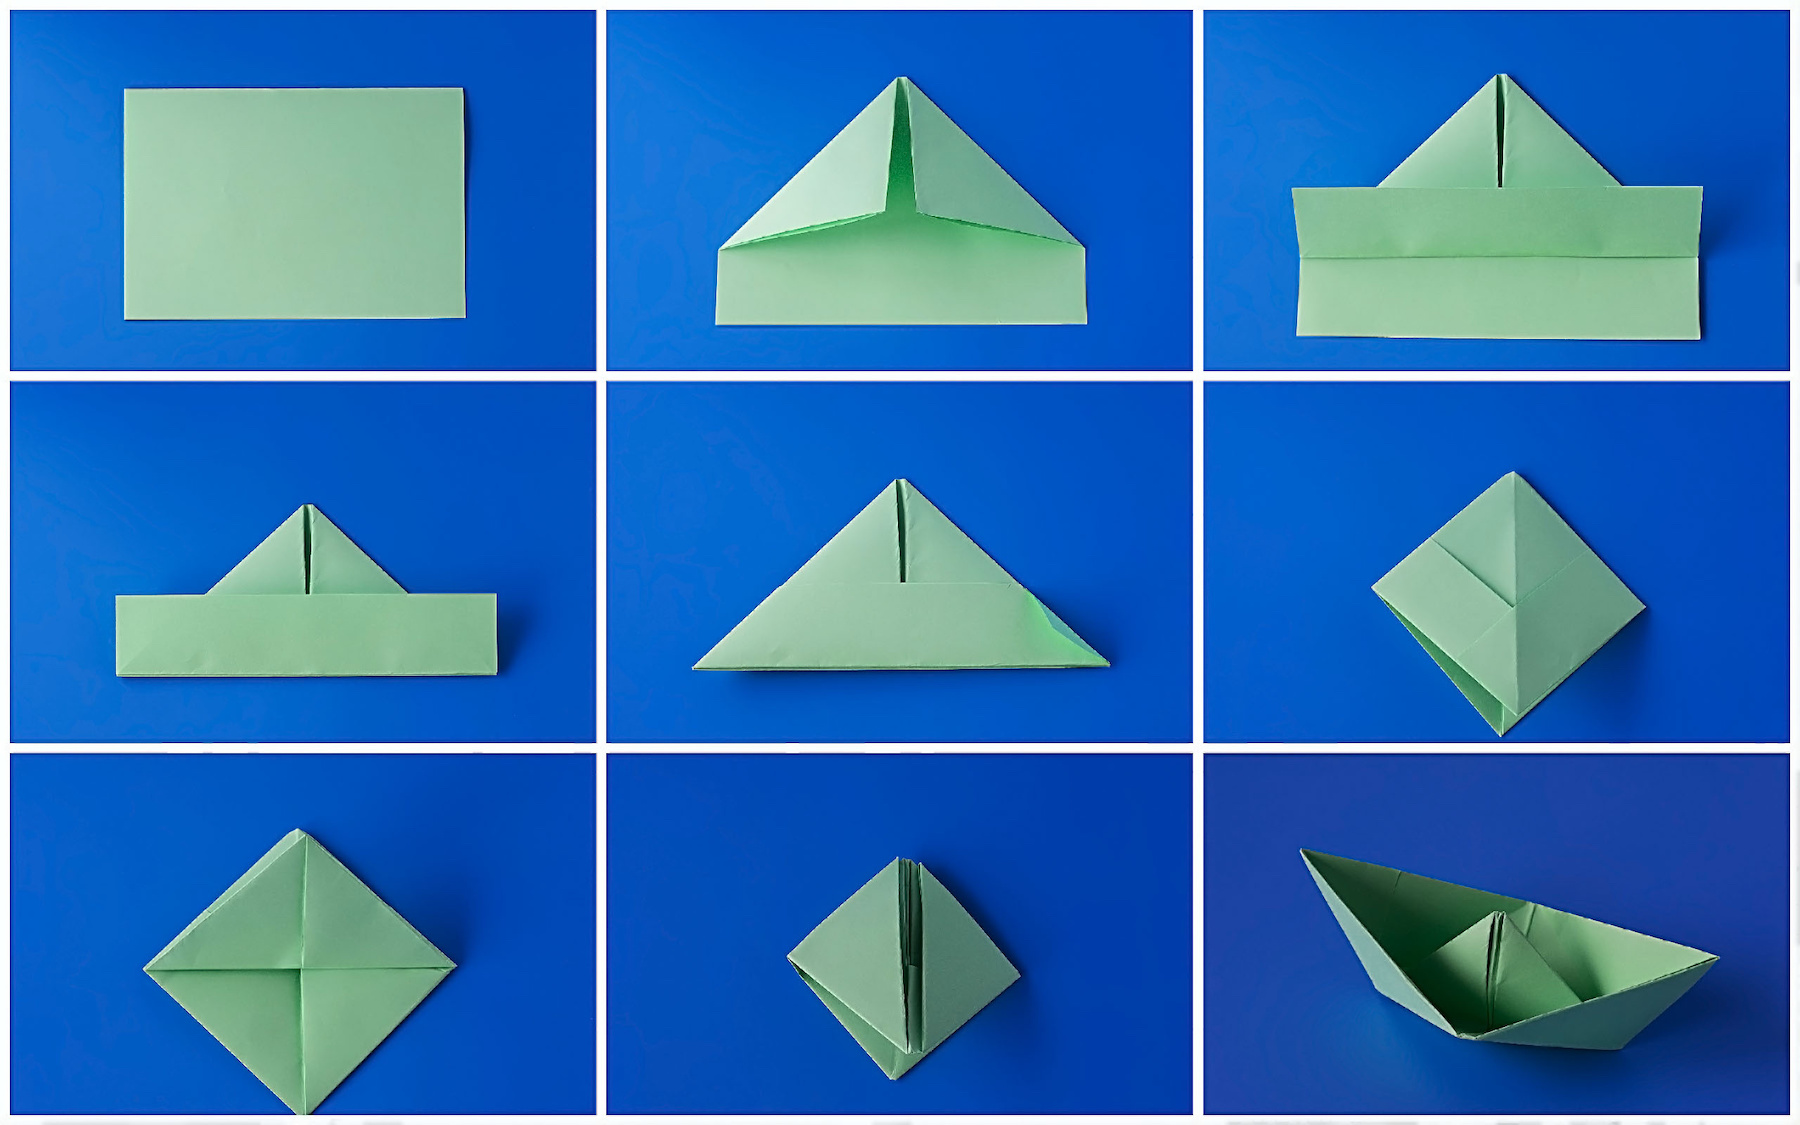 How to make a paper boat